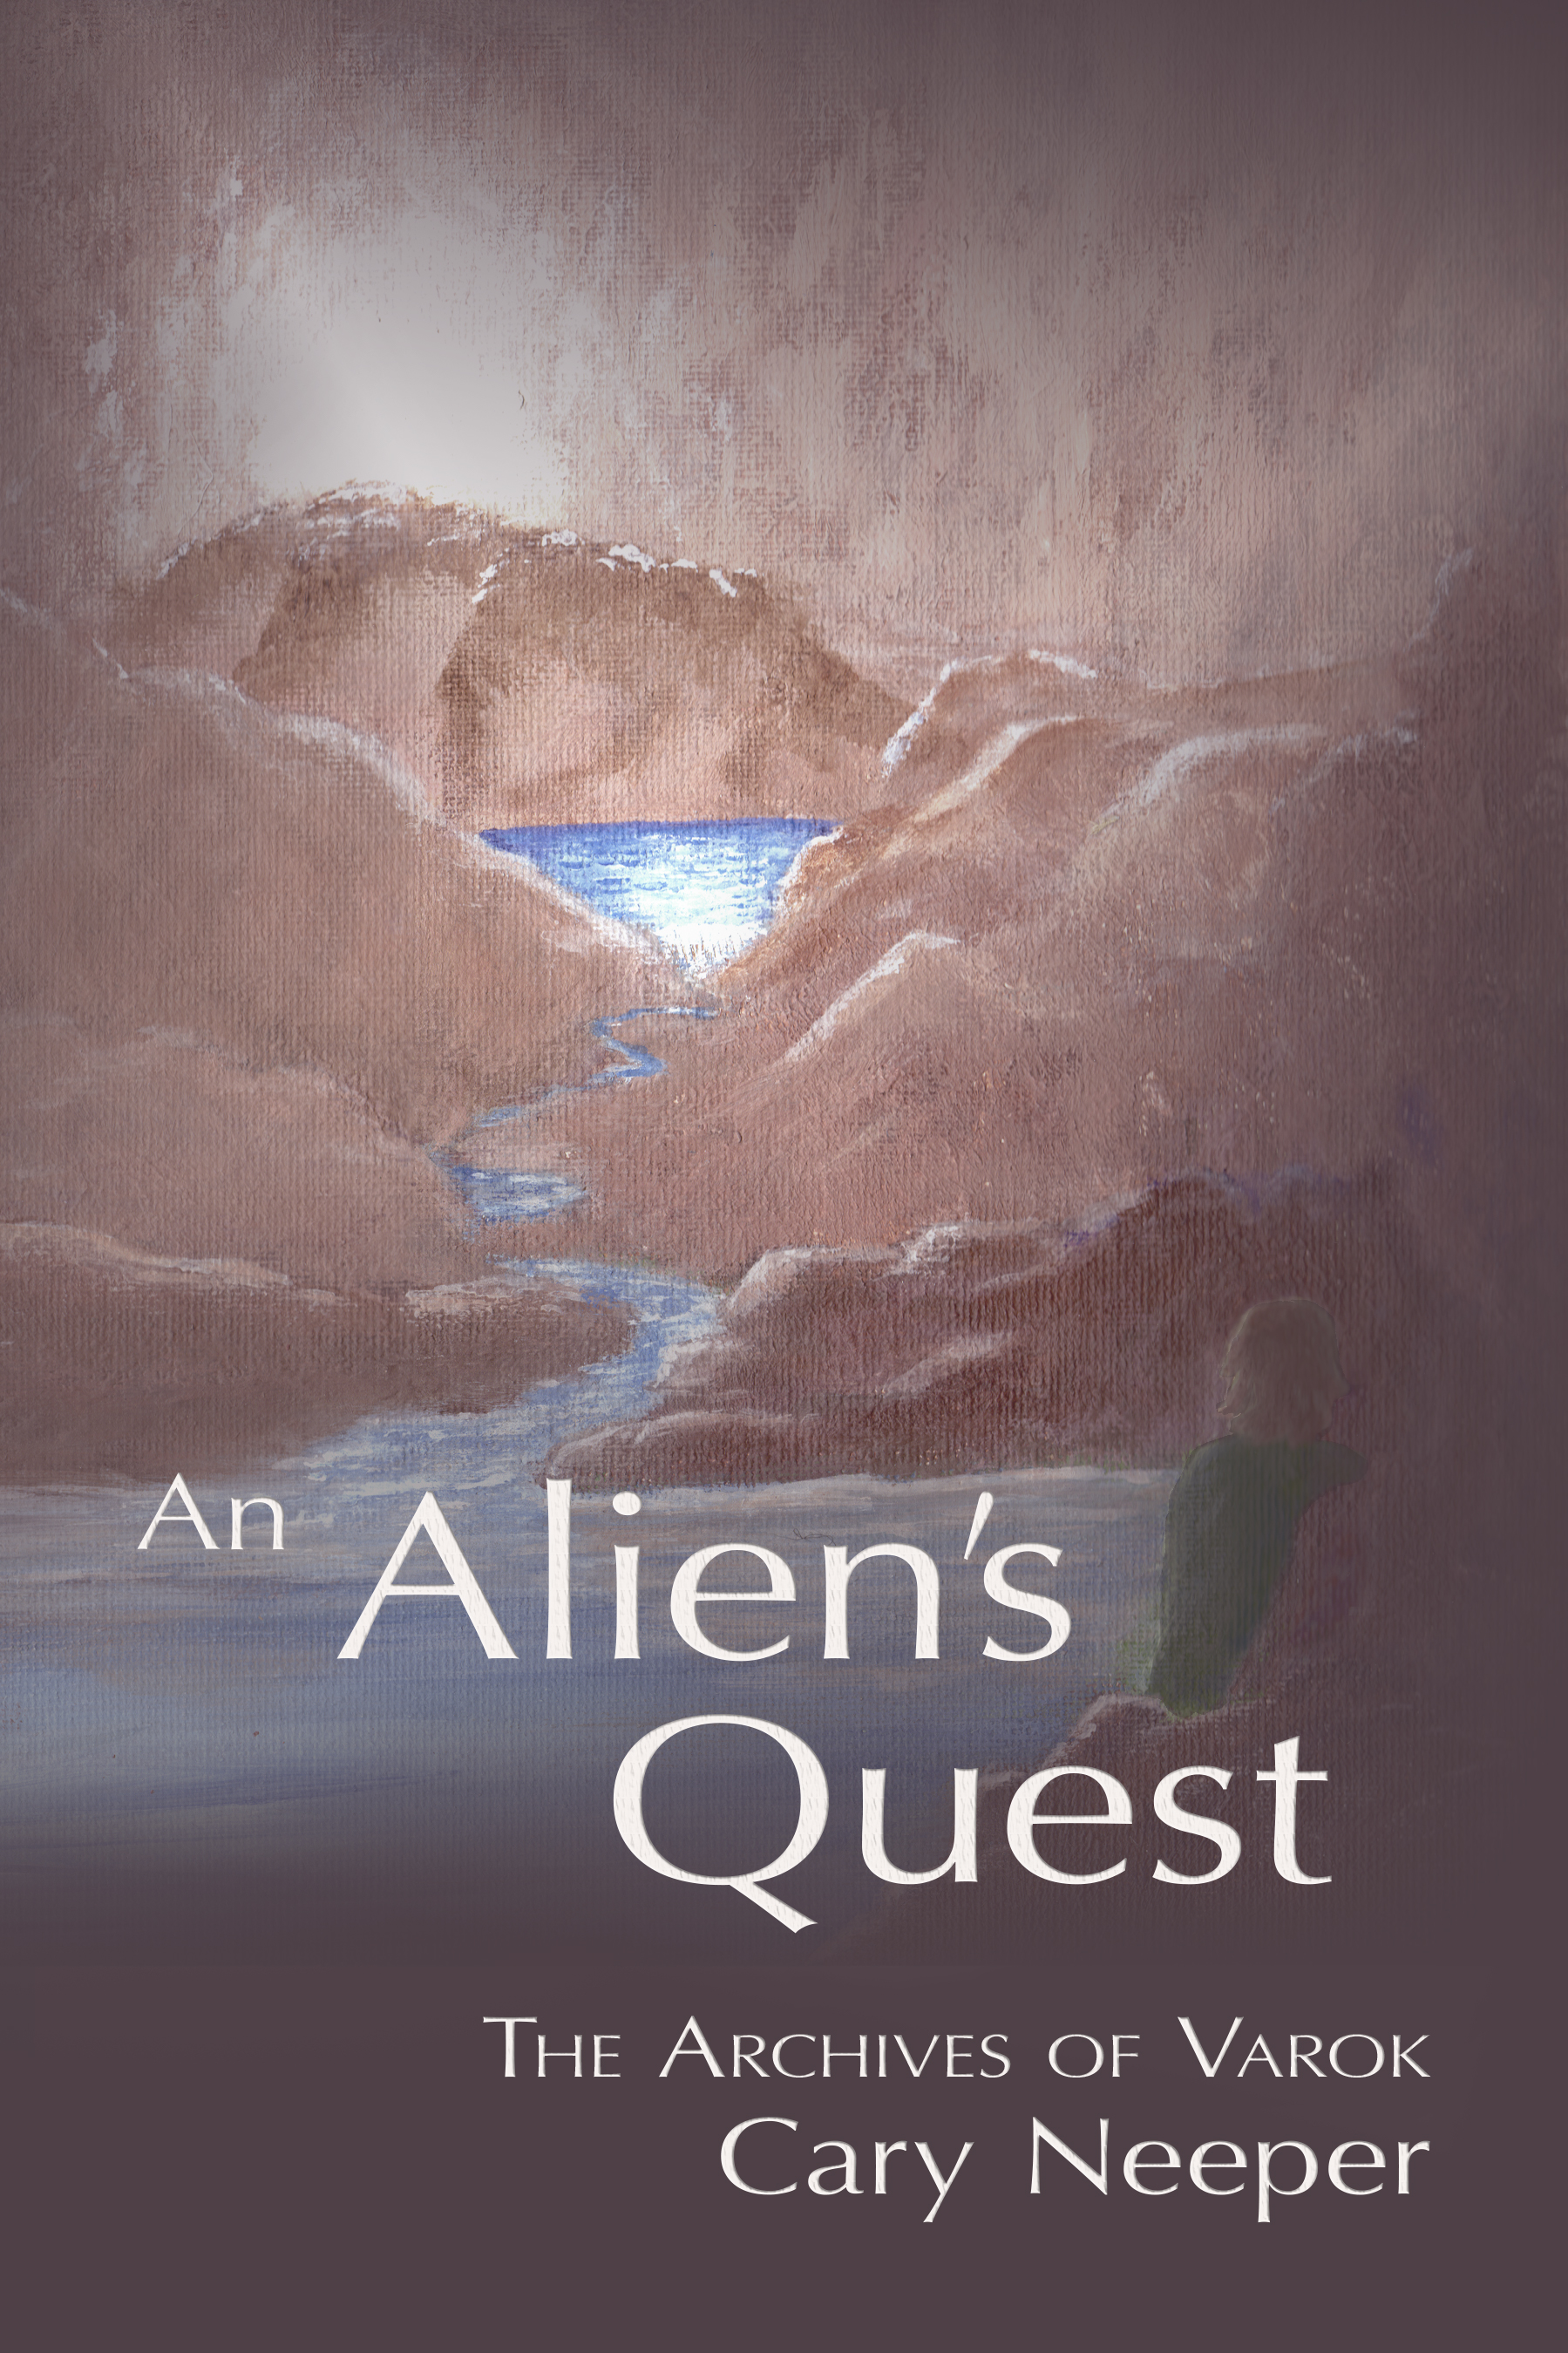 book cover image: woman sitting in a watery cave on the planet Ellason. Cover painting by Cary Neeper.